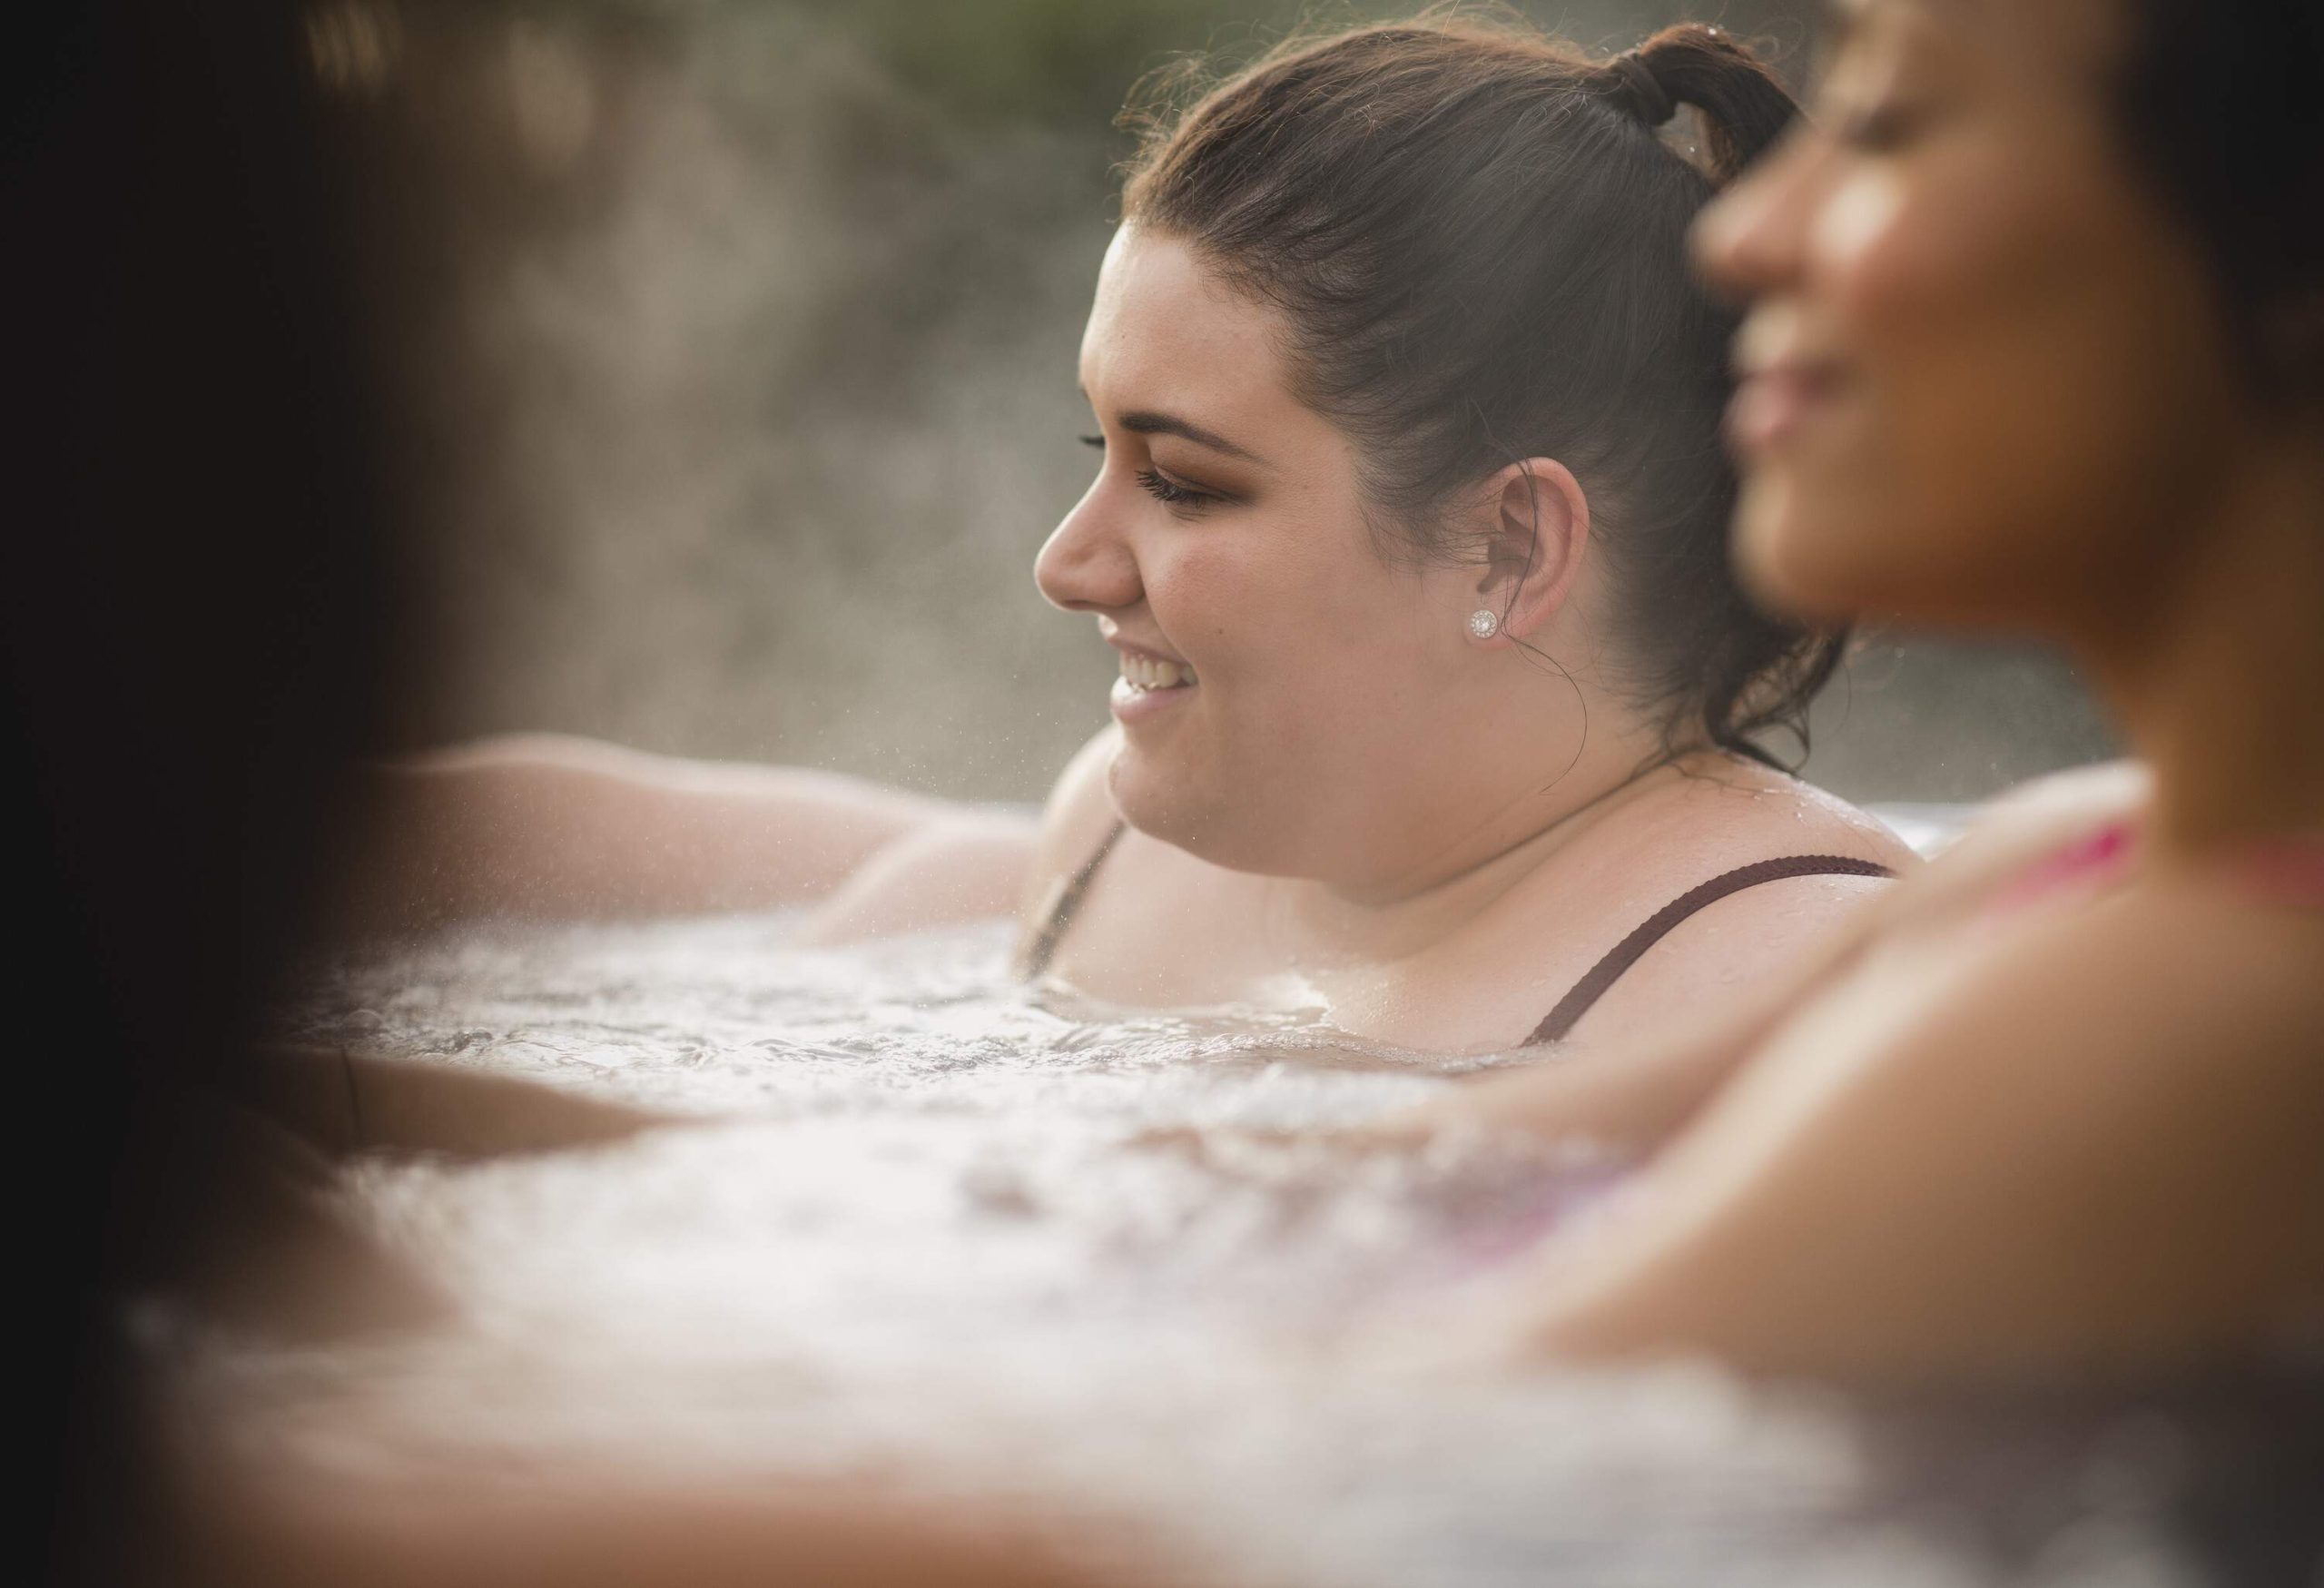 theme_wellness_spa_hot_tub_people_women_gettyimages-1143252343_universal_within-usage-period_100060